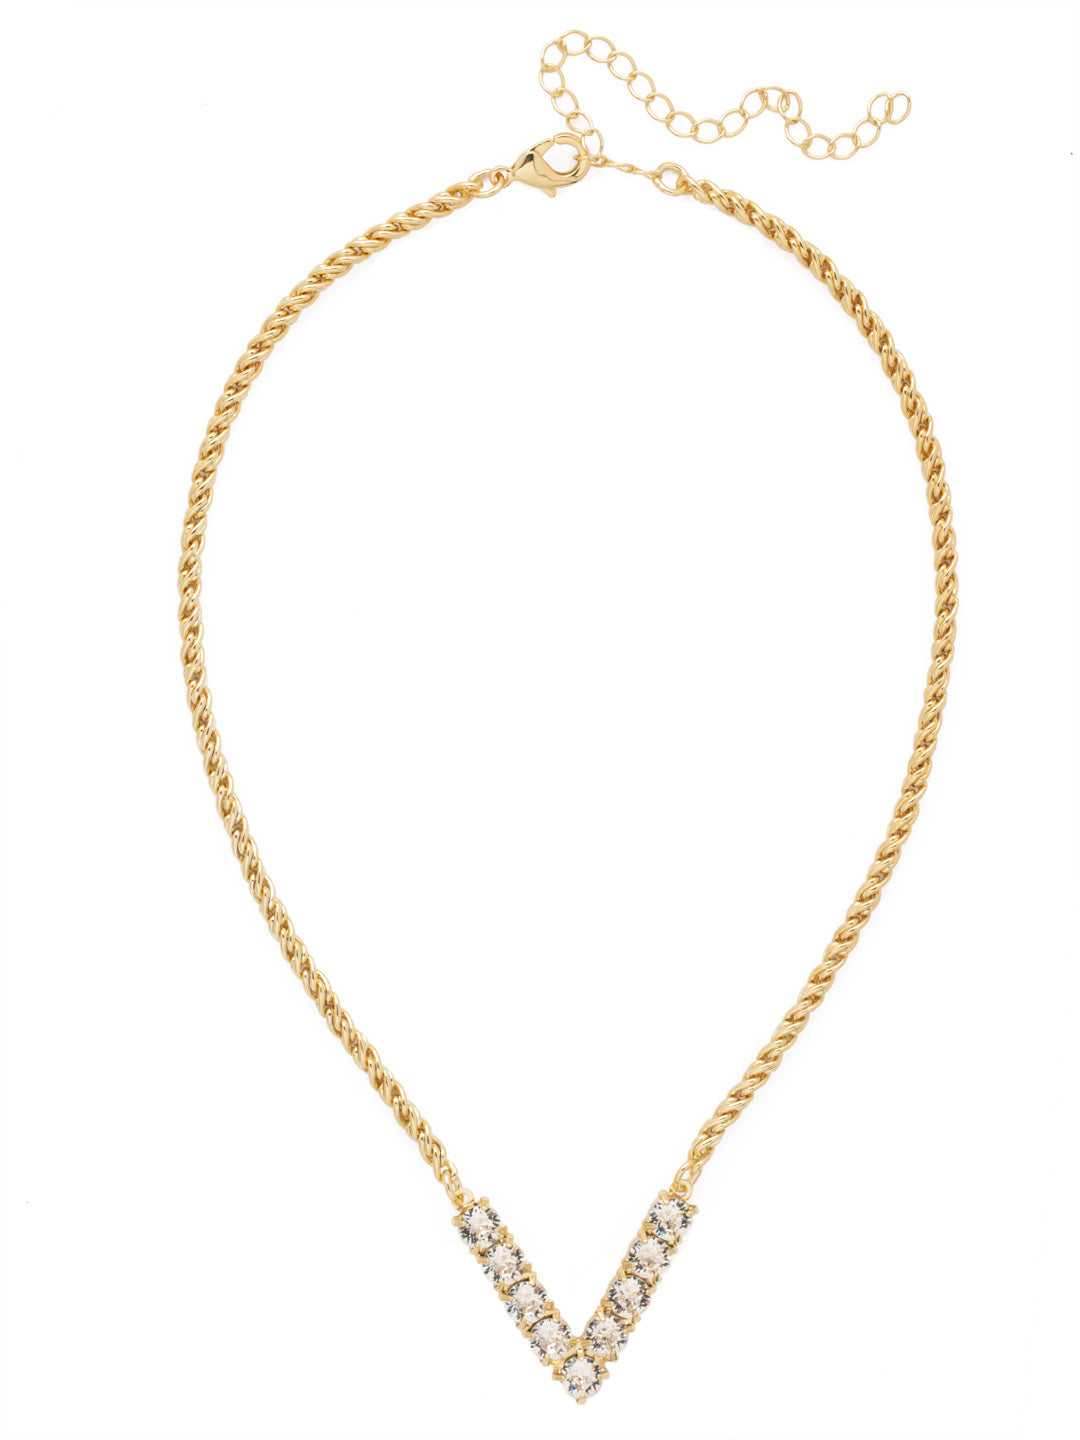 V Initial Rope Pendant Necklace - NFK41BGCRY - <p>The Initial Rope Pendant Necklace features a crystal encrusted metal monogram pendant on an adjustable rope chain, secured with a lobster claw clasp. From Sorrelli's Crystal collection in our Bright Gold-tone finish.</p>